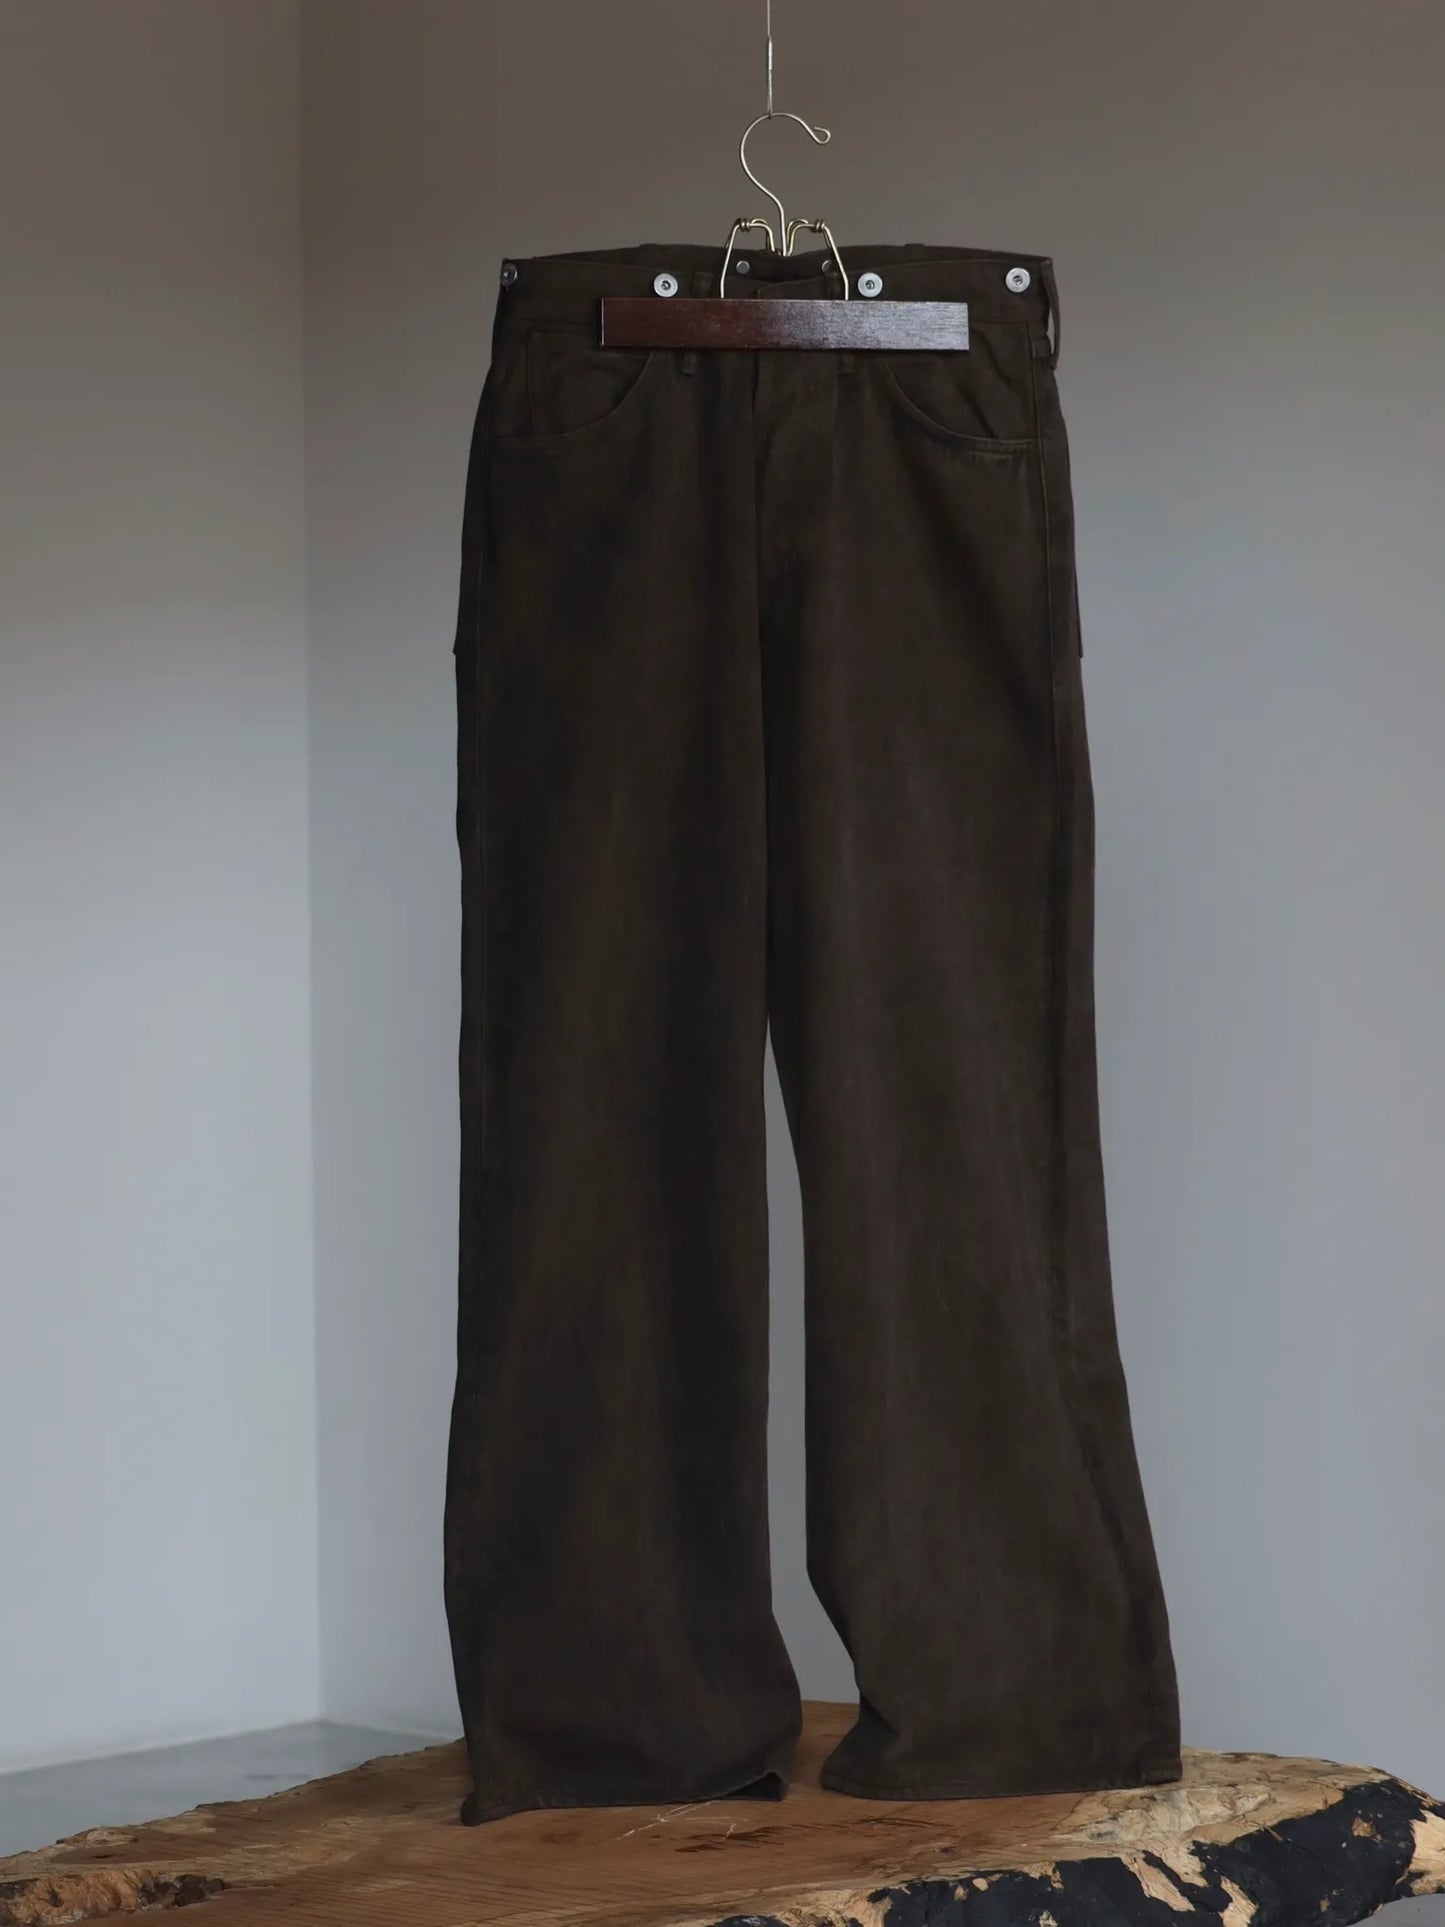 t-t-buckle-backedtrousers-mud-dyed-brown-1